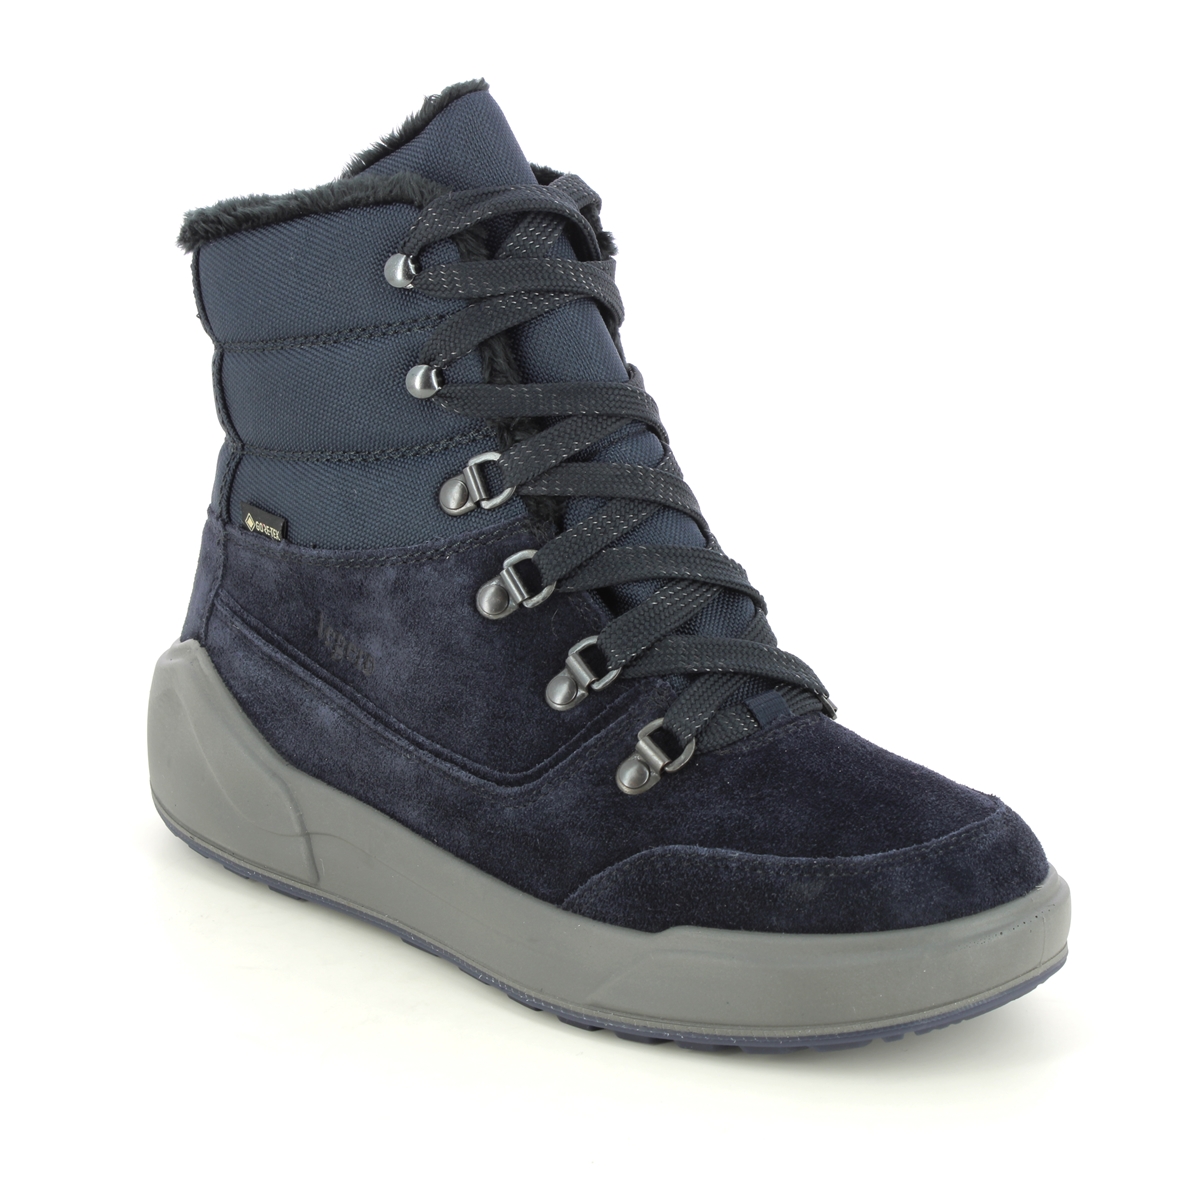 Legero Cosy Lace Gtx Navy Suede Womens Winter Boots 2000286-8000 In Size 4 In Plain Navy Suede